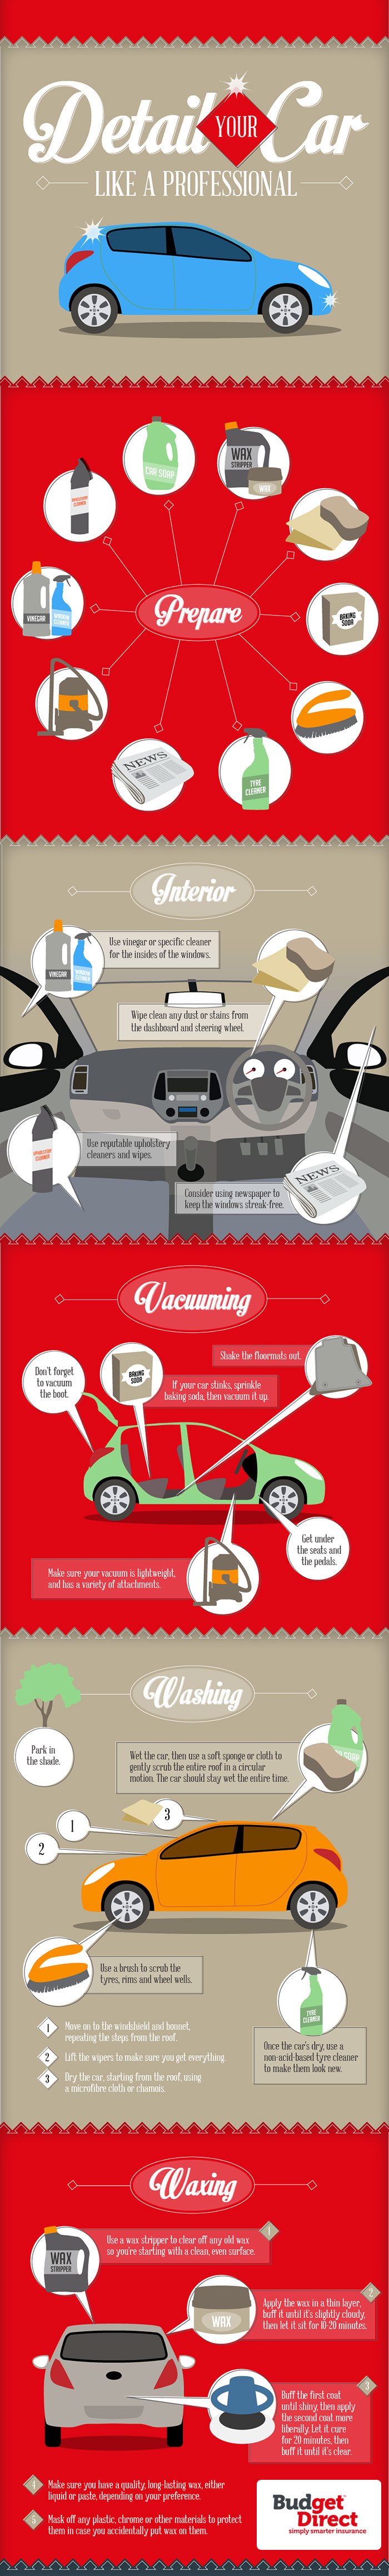 Detail Your Car Like a Professional Infographic